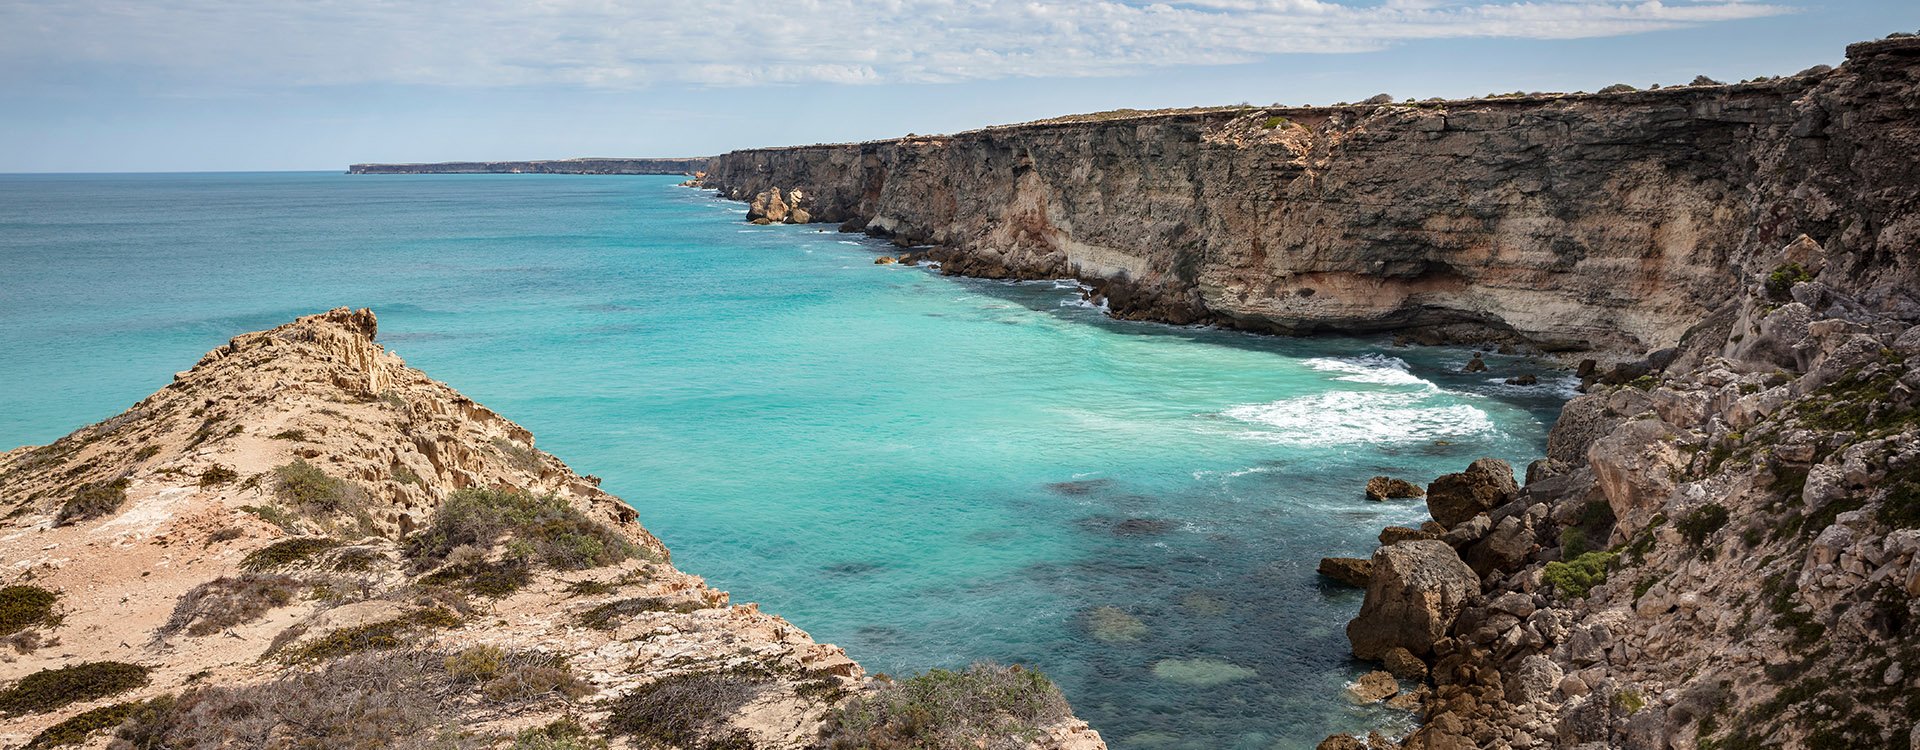 View of the cliffs at the Great Australian Bight in South Australia